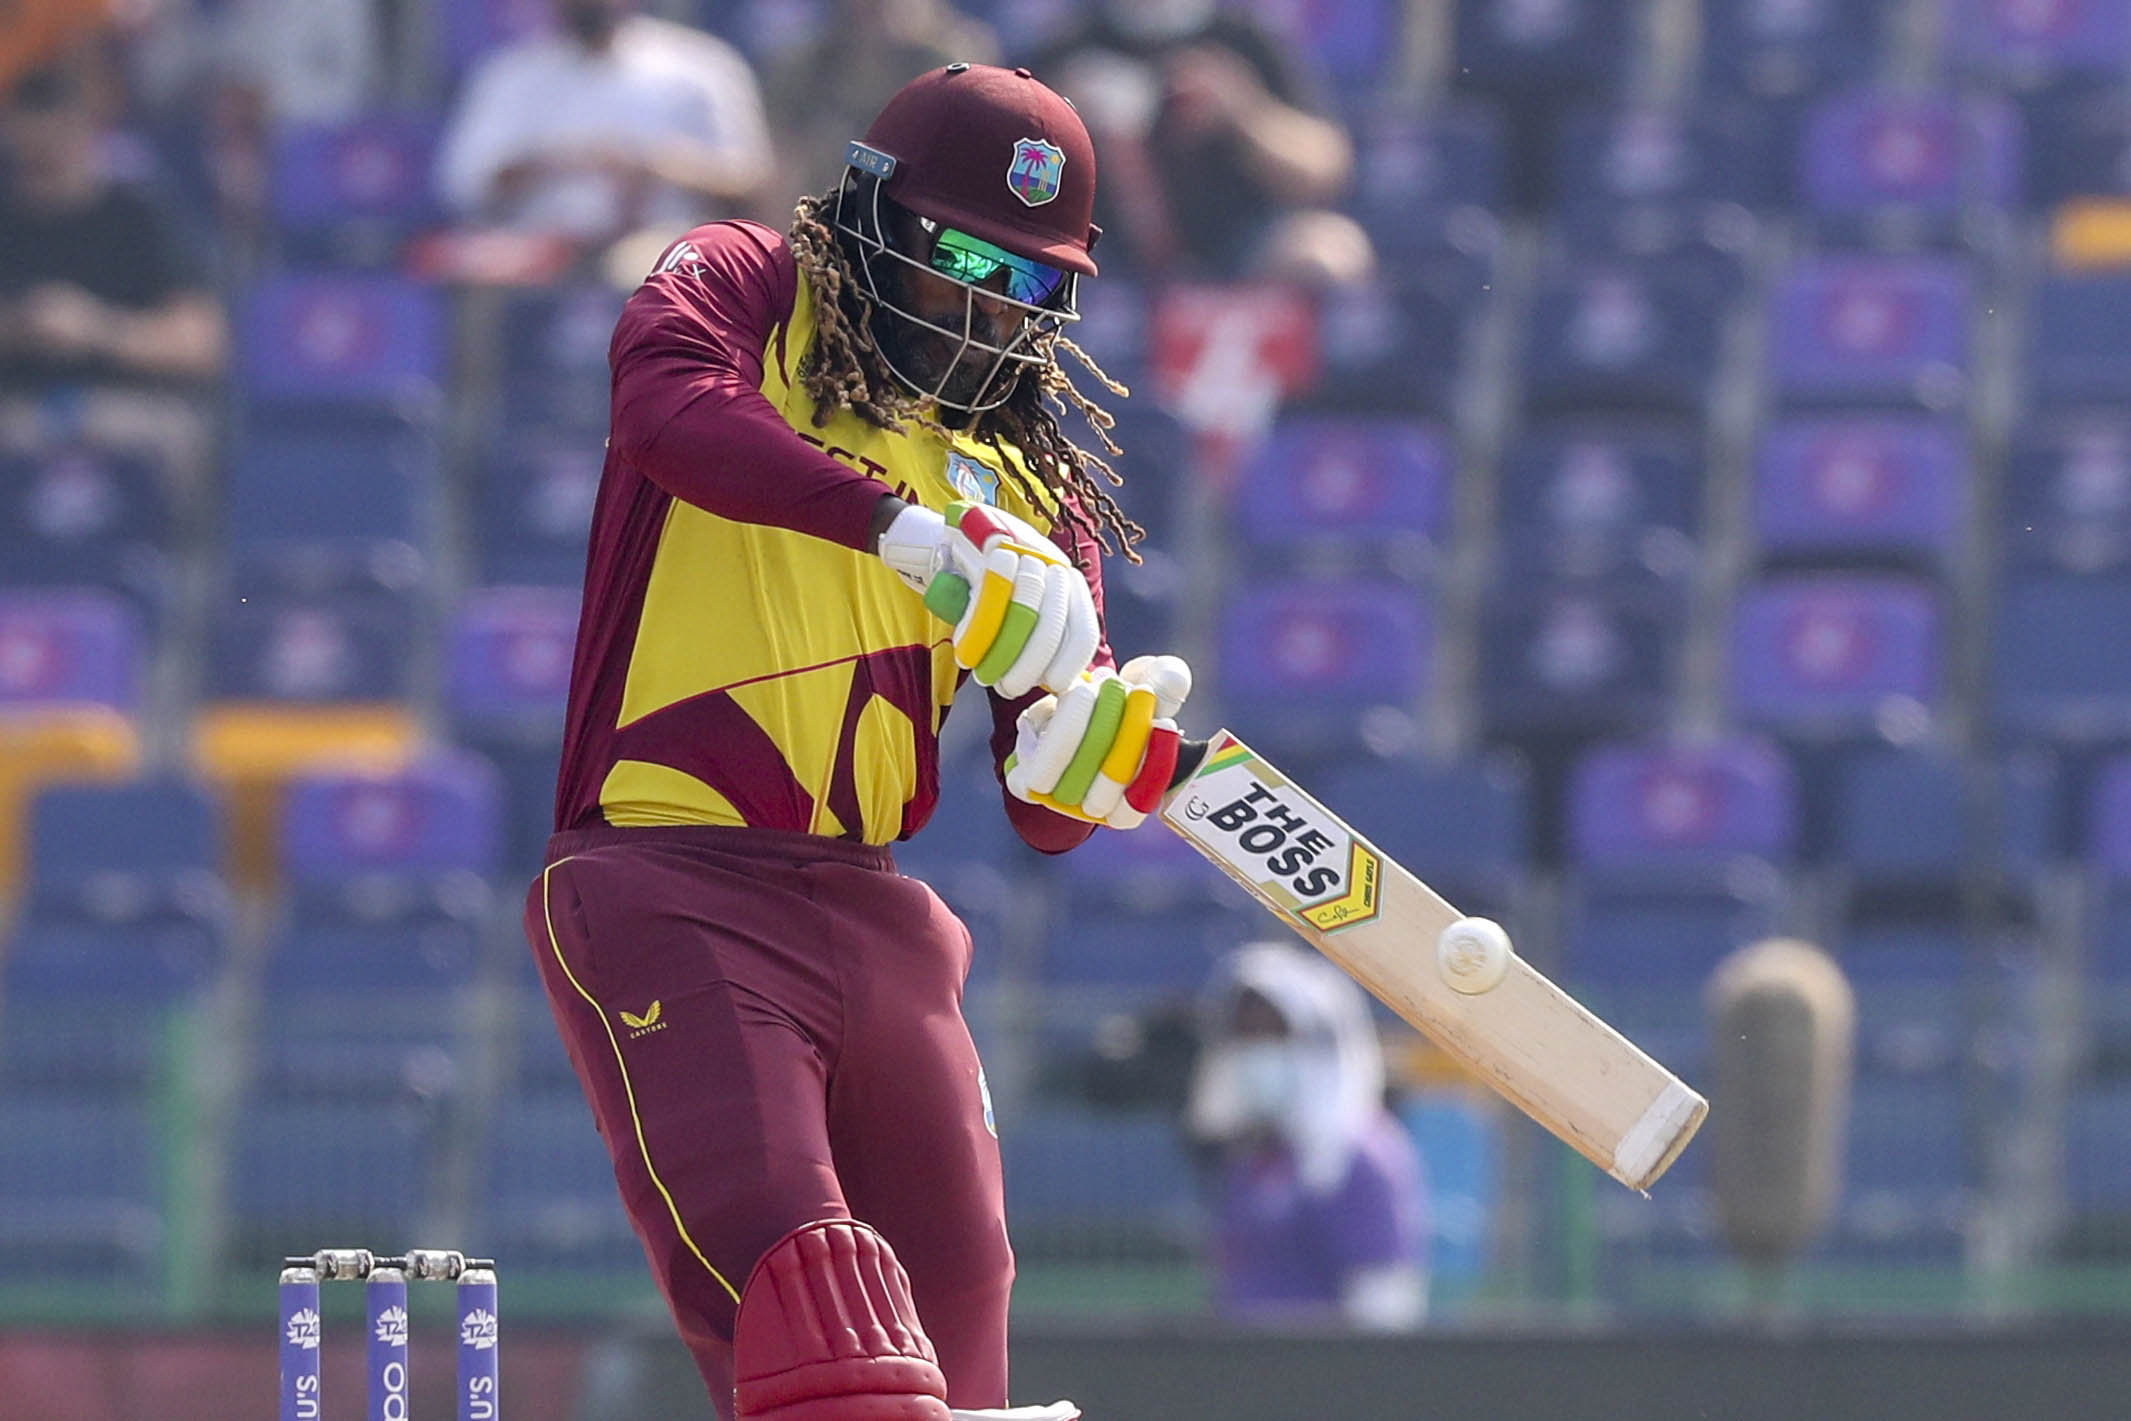 Doubtful you’ll see me playing again for West Indies: Chris Gayle on his future